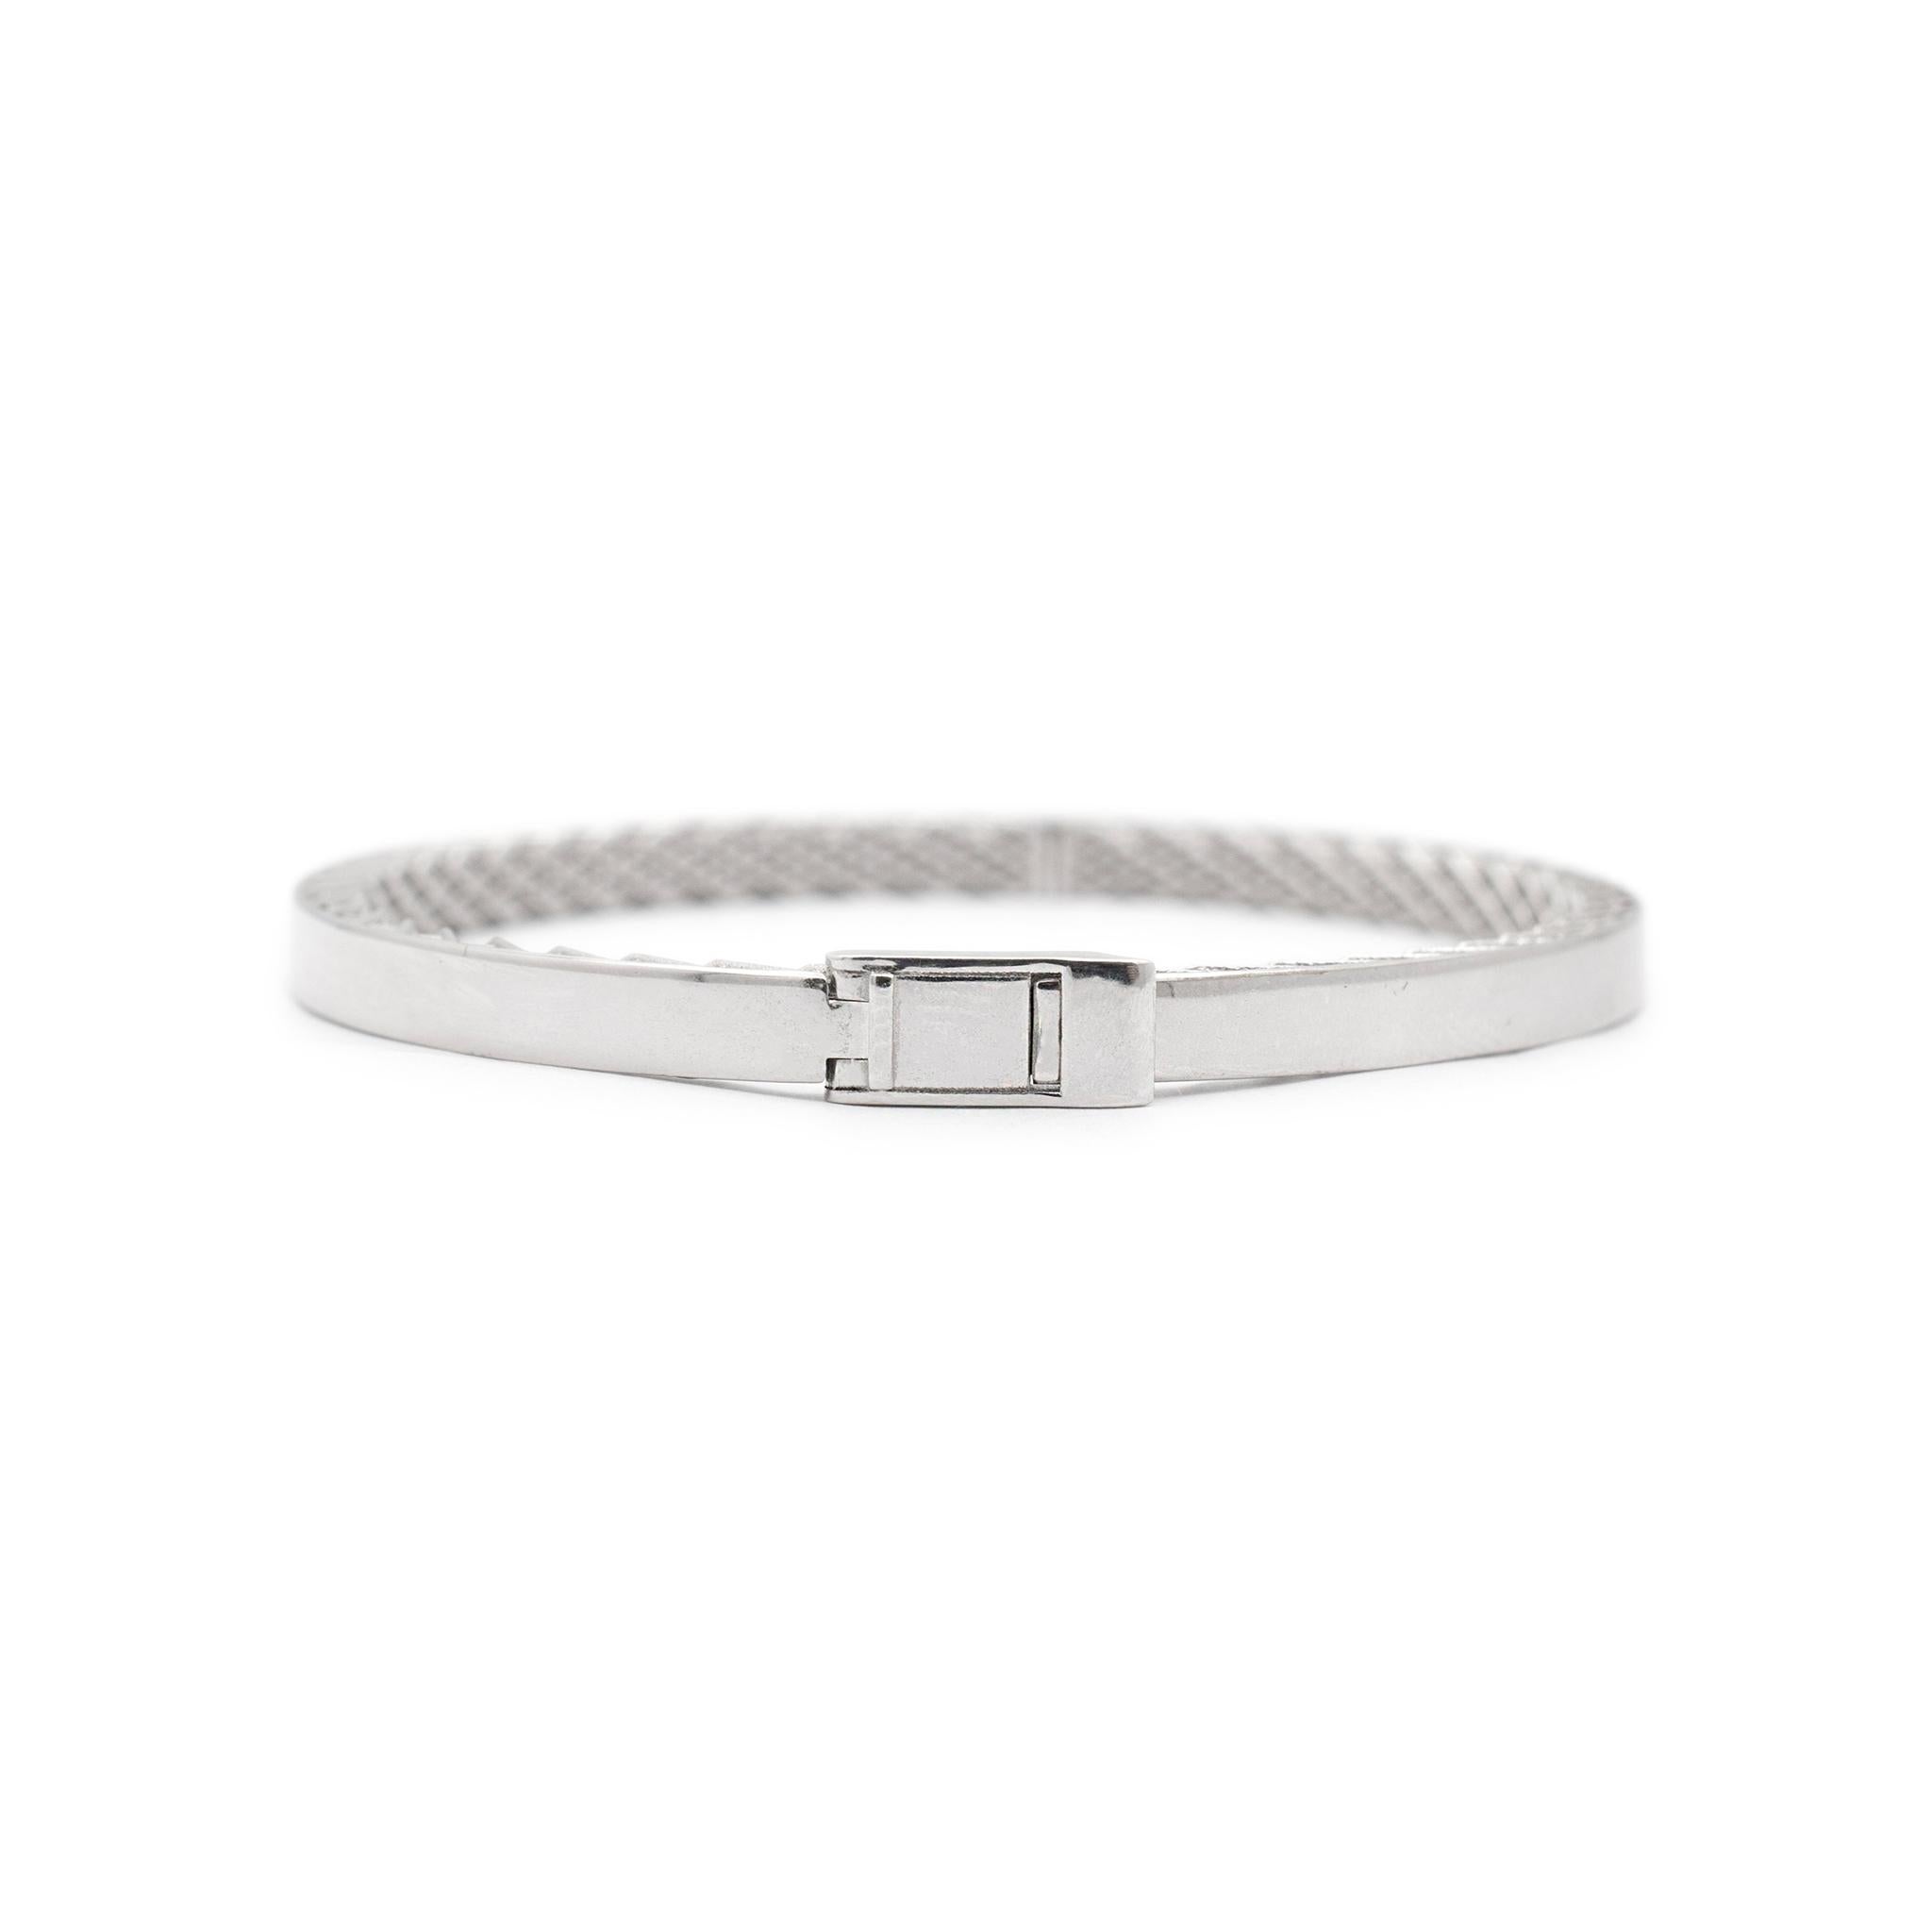 Brand: Roberto Coin

Gender: Ladies

Metal Type: 18K White Gold

Length: 6.00 inches

Width: 3.75 mm

Weight: 11.50 grams

18K white gold ruby bangle bracelet. Engraved with 